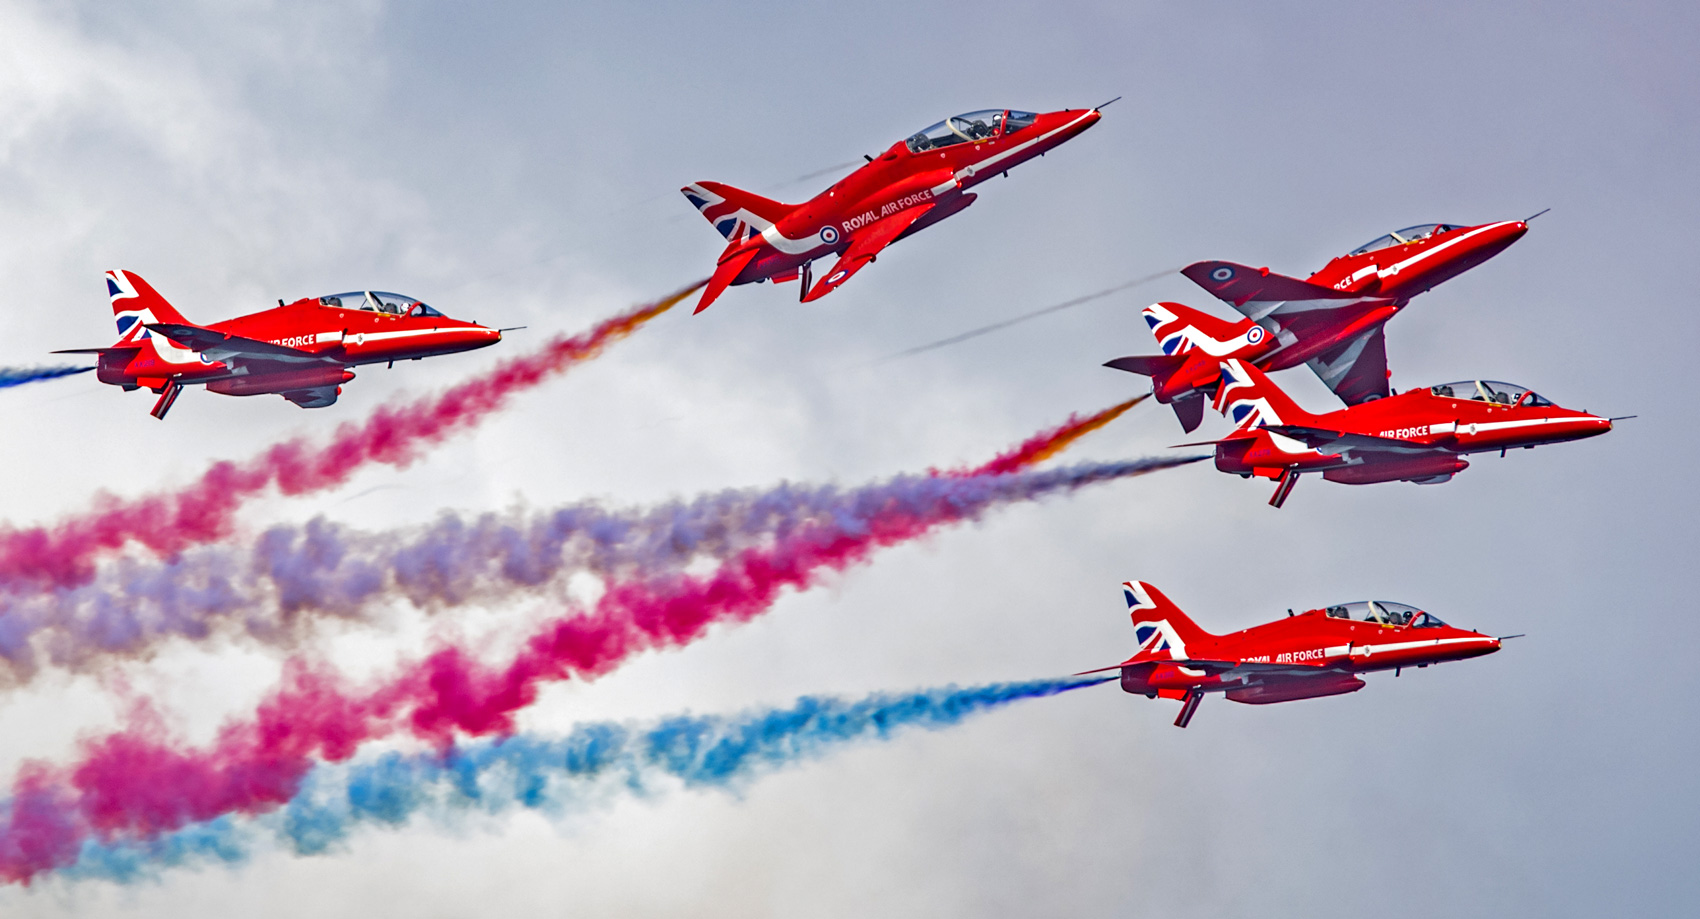 The Red Arrows aerobatic team with their signature coloured exhaust smoke